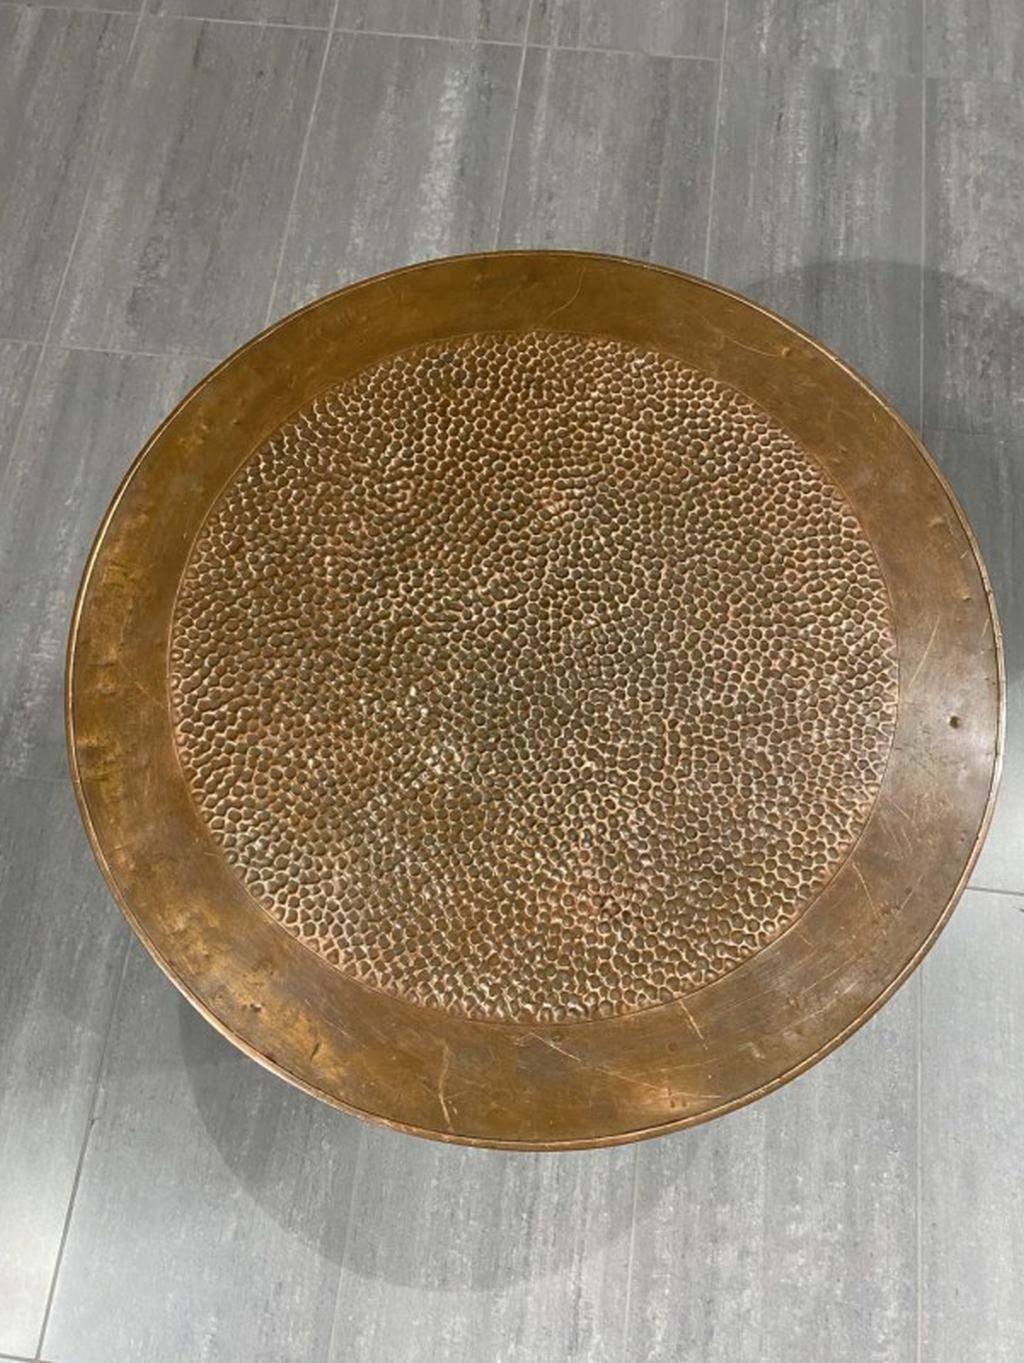 Vienna Secession Adolf Loos Style Six-Legged Table with Copper Plate For Sale